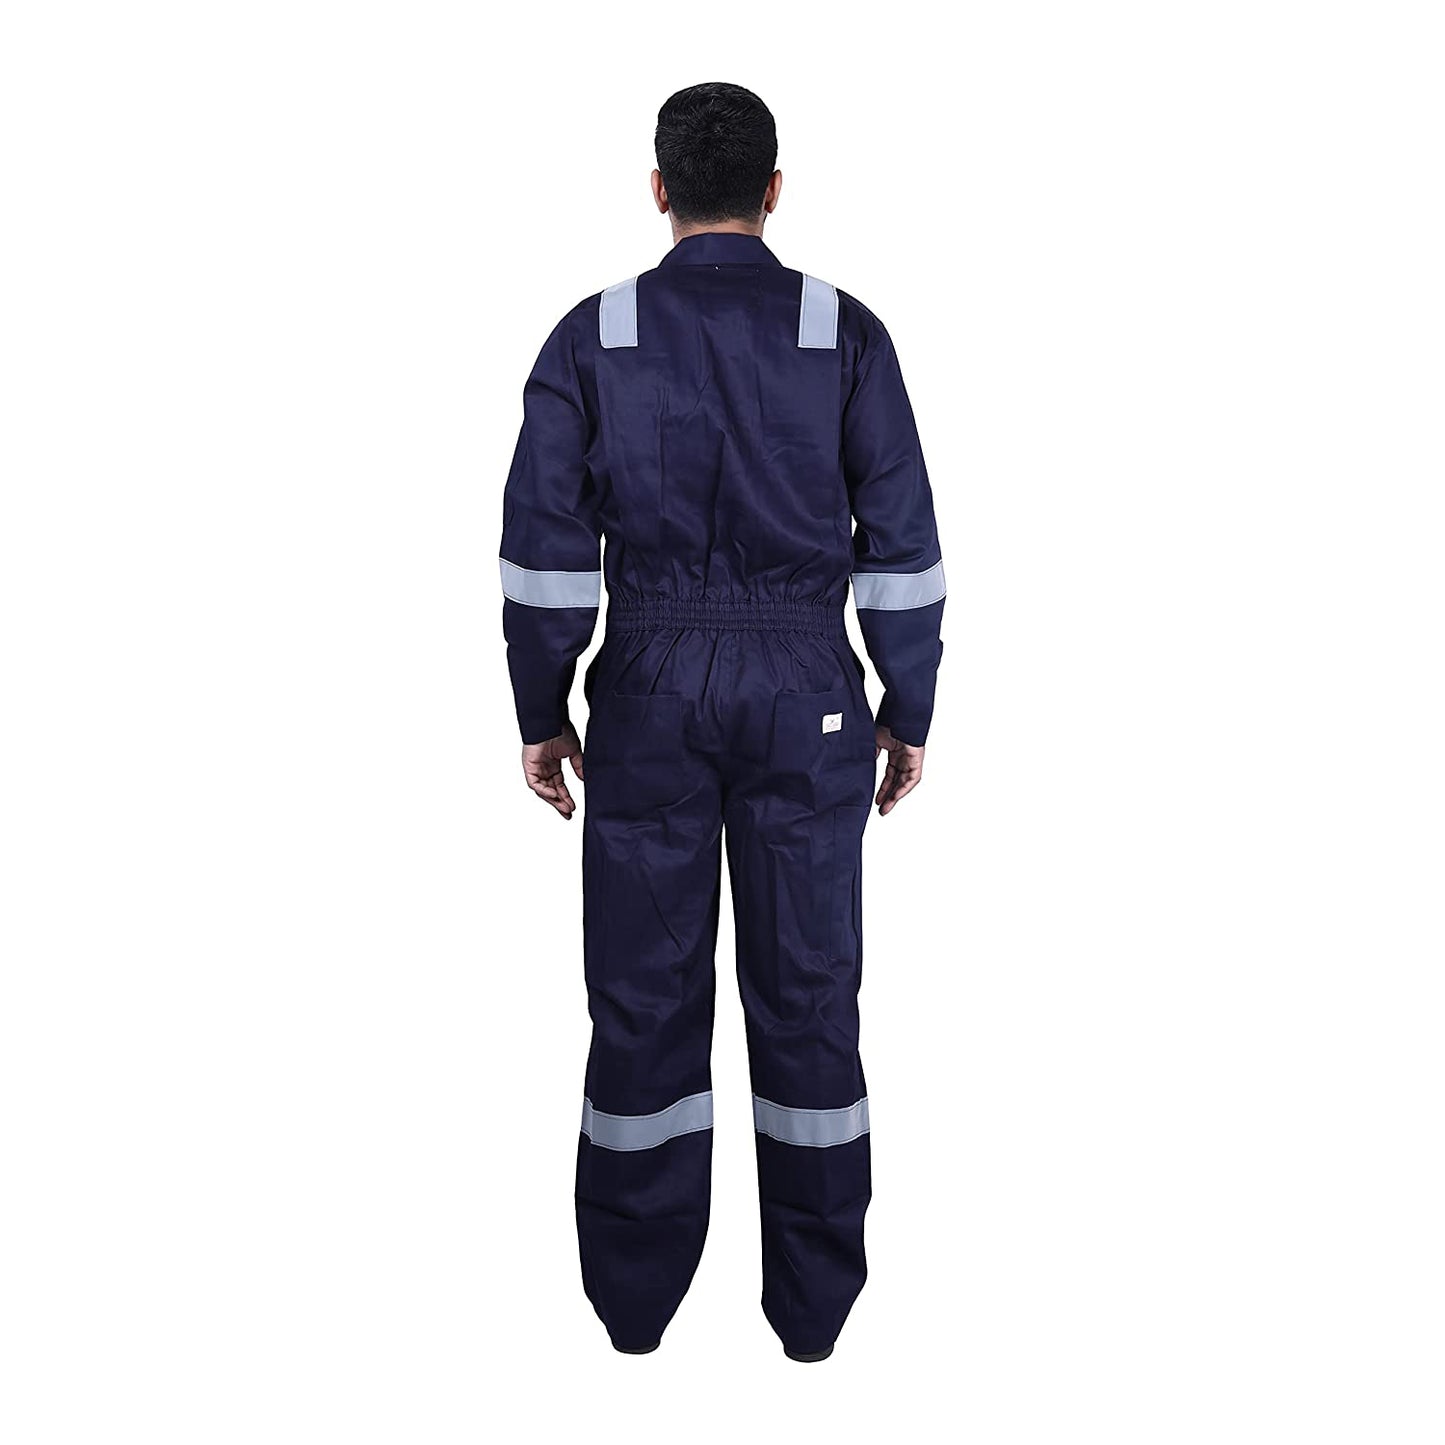 Boiler suits with reflective tape